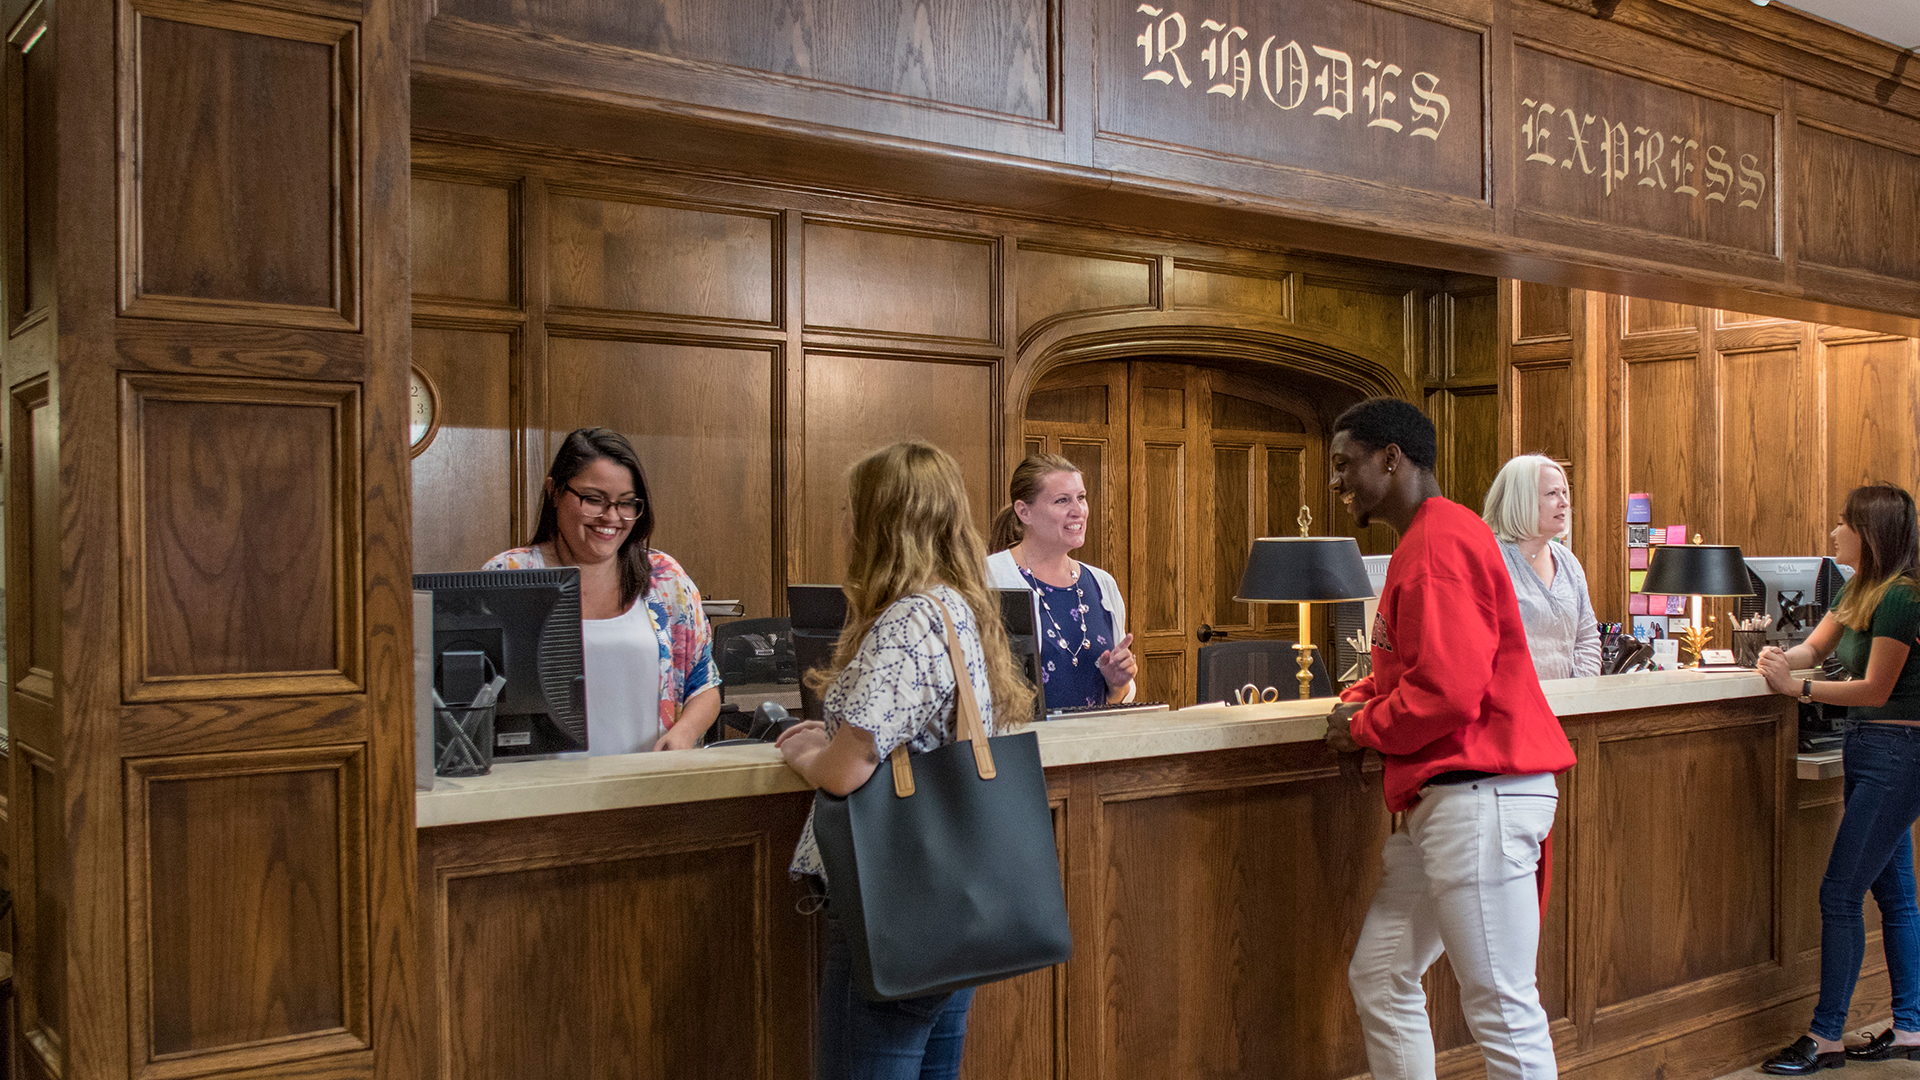 students doing business at a counter with oak paneling in the background.